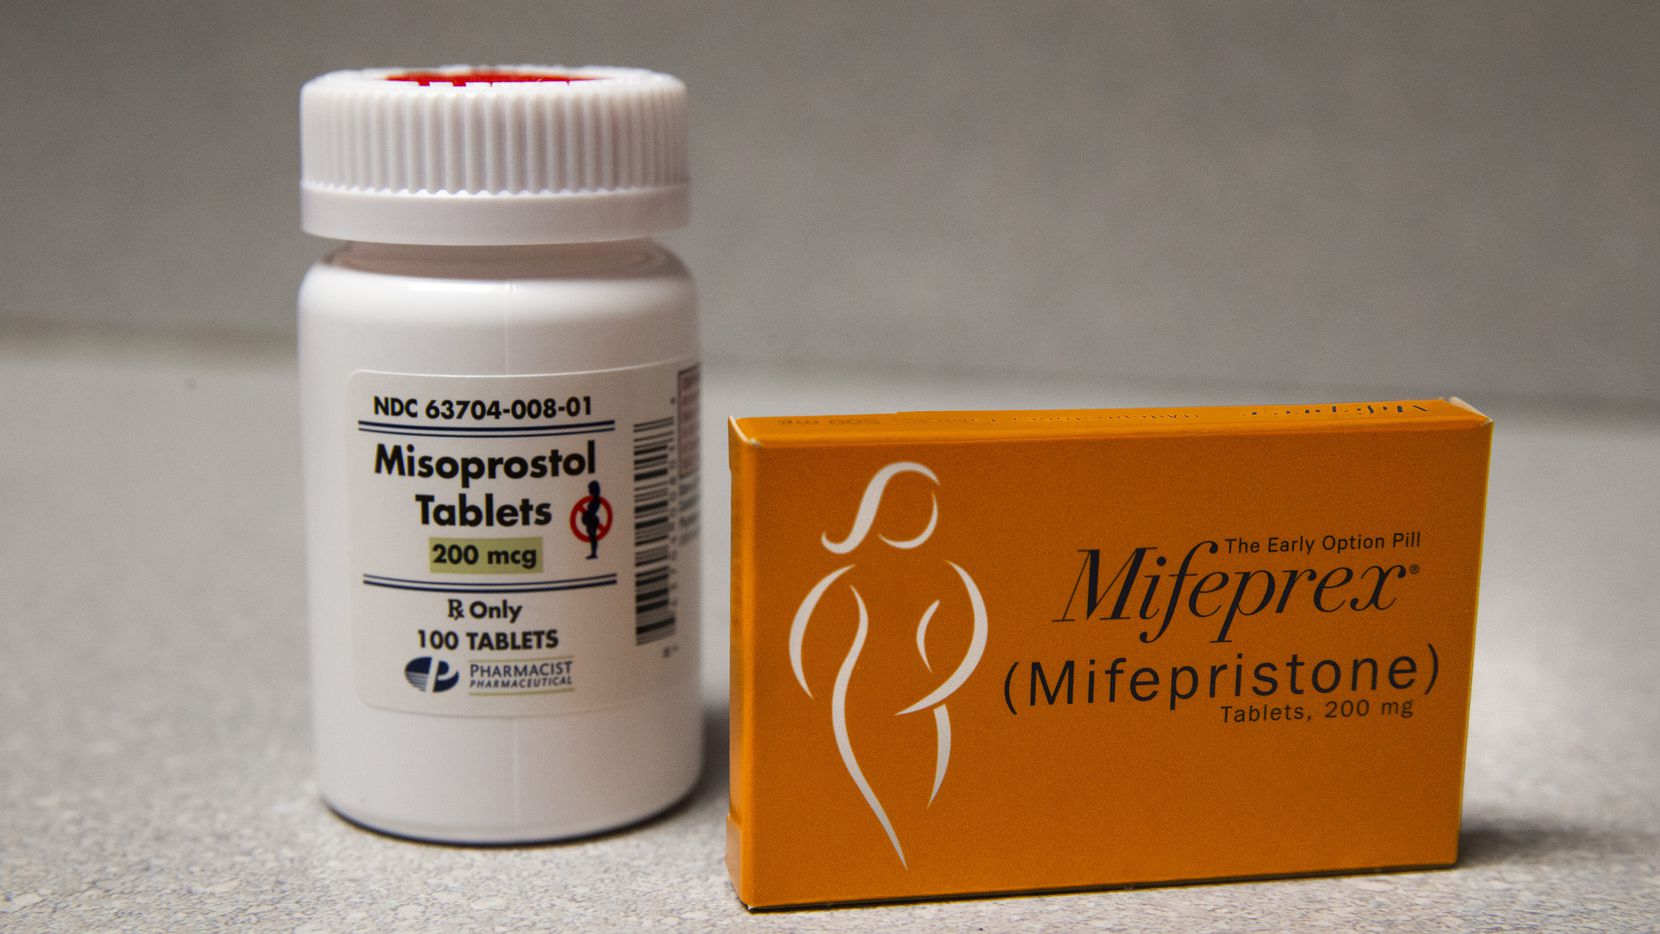 A bottle of Misoprostol and a box of Mifeprex (Mifespristone) medications at the Whole Women's Health clinic in Fort Worth, Texas, on Thursday, November 21, 2019. These medications can terminate a pregnancy if taken together within 10 weeks of a person's last menstrual period. Federal Drug Administration regulations require mifepristone to be dispensed directly by a qualified health care provider. (Lynda M. Gonzalez/The Dallas Morning News)